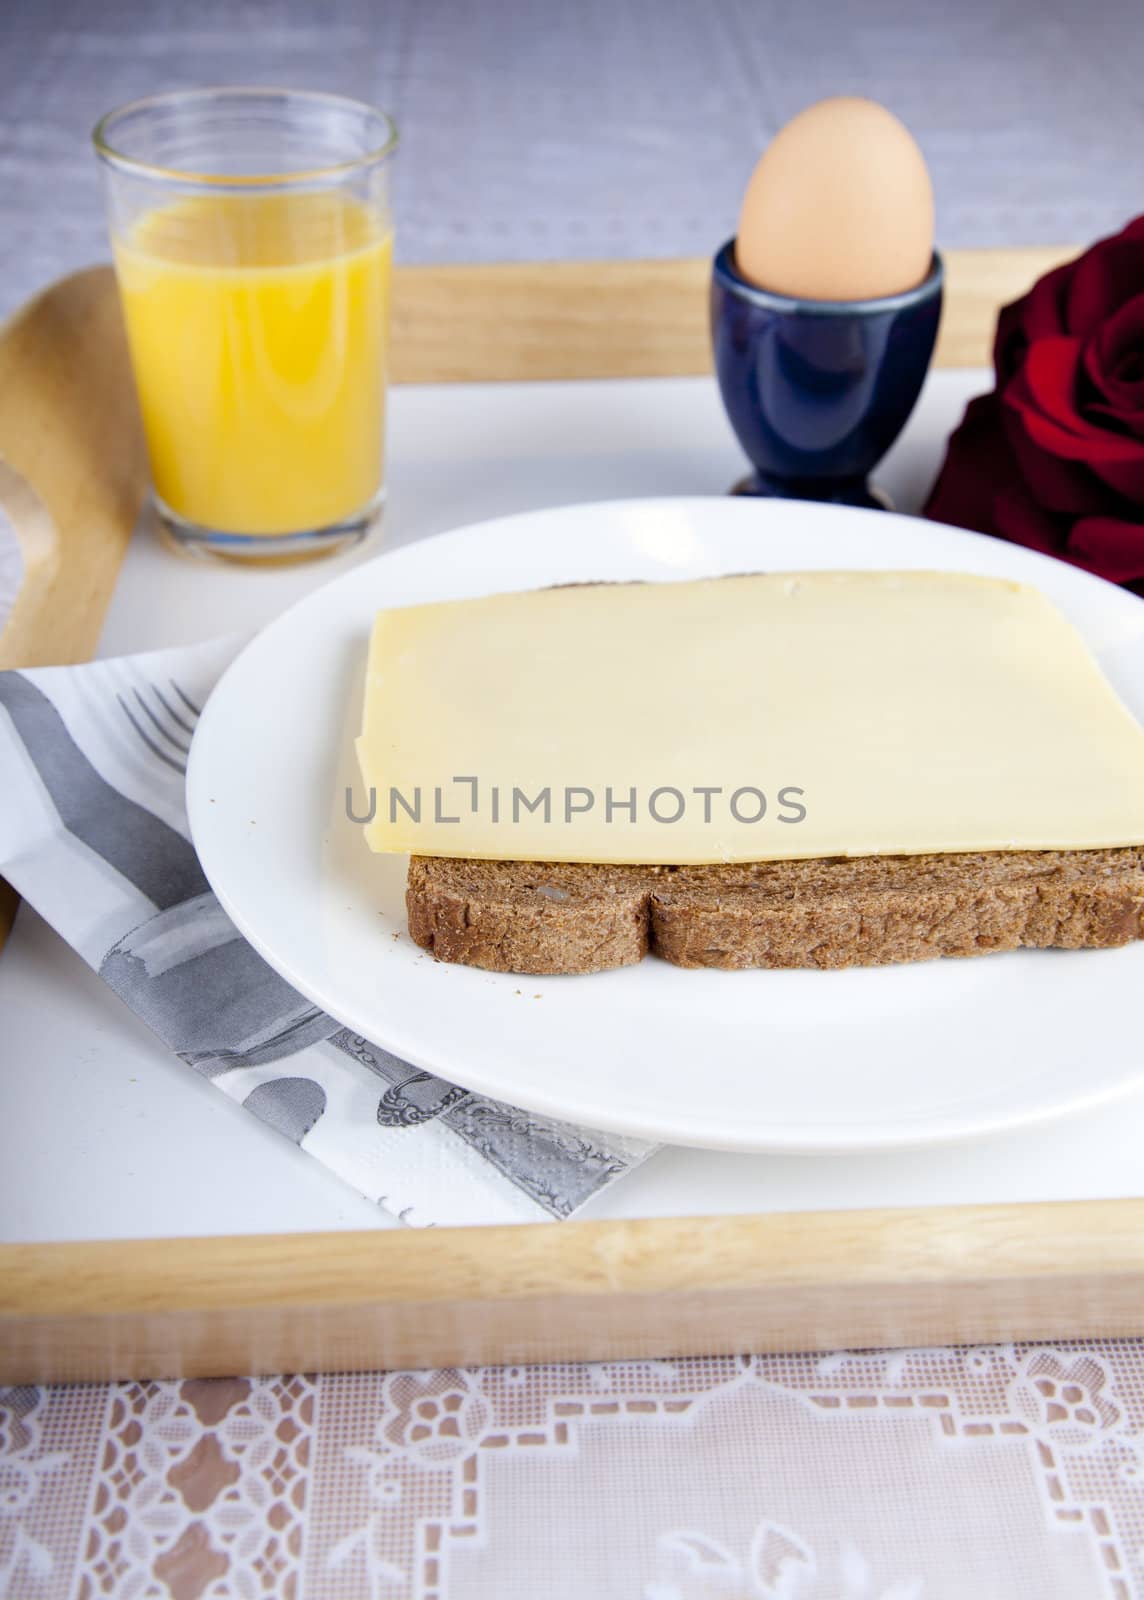 Breakfast on plate with bread, cheese, egg and orange jus